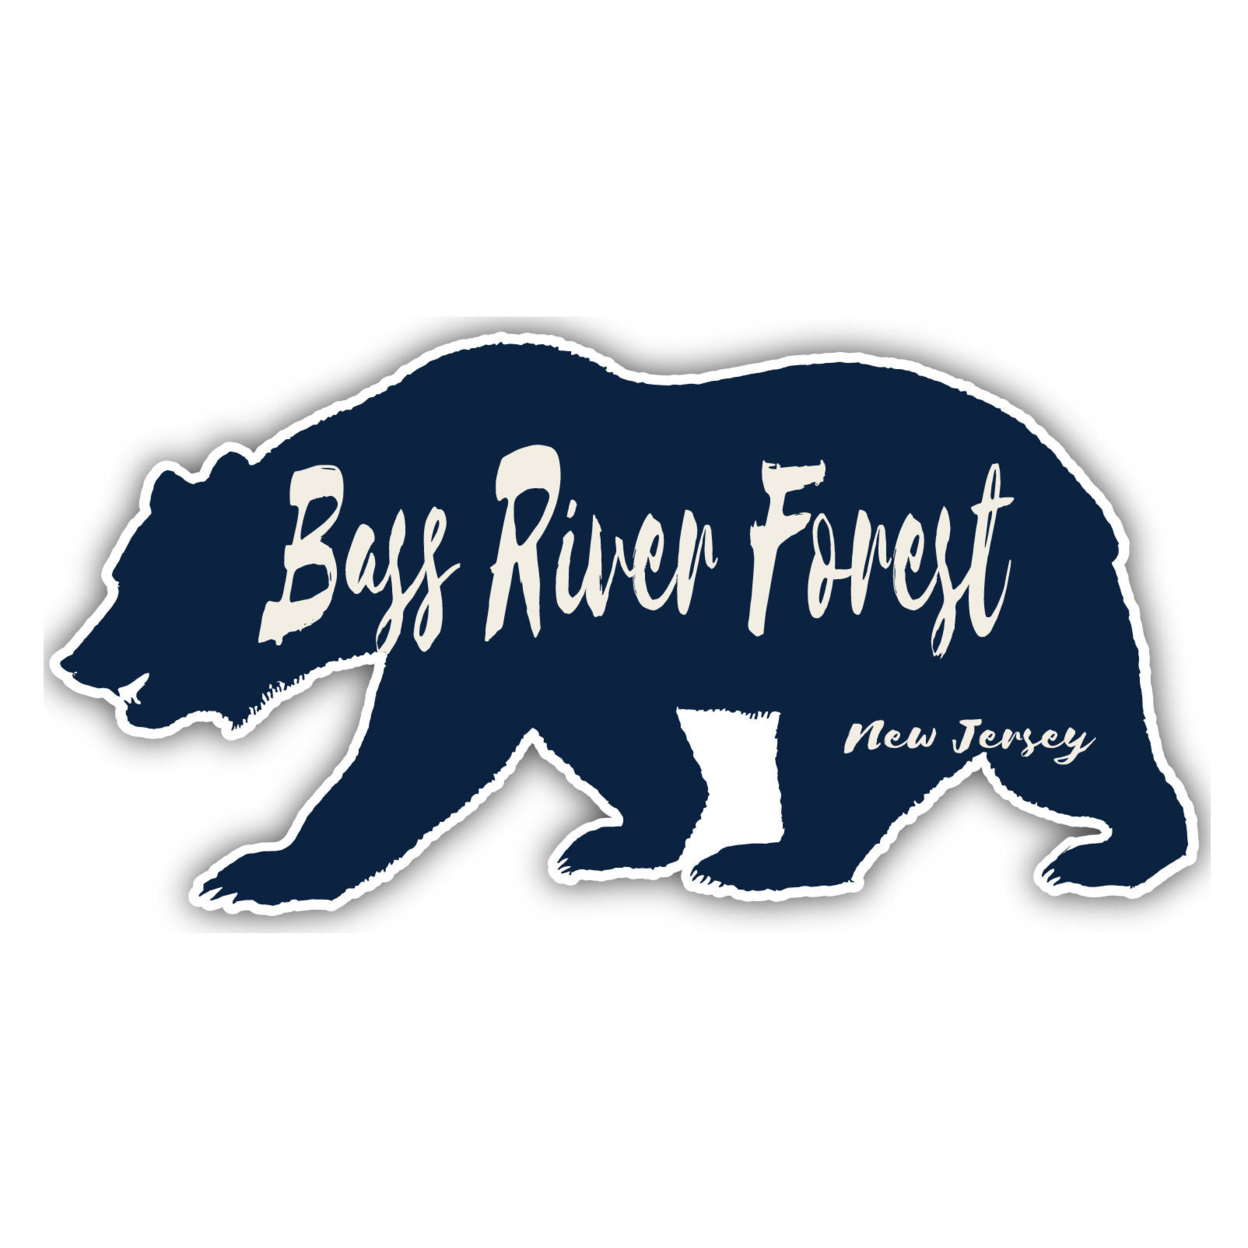 Bass River Forest New Jersey Souvenir Decorative Stickers (Choose Theme And Size) - Single Unit, 12-Inch, Bear